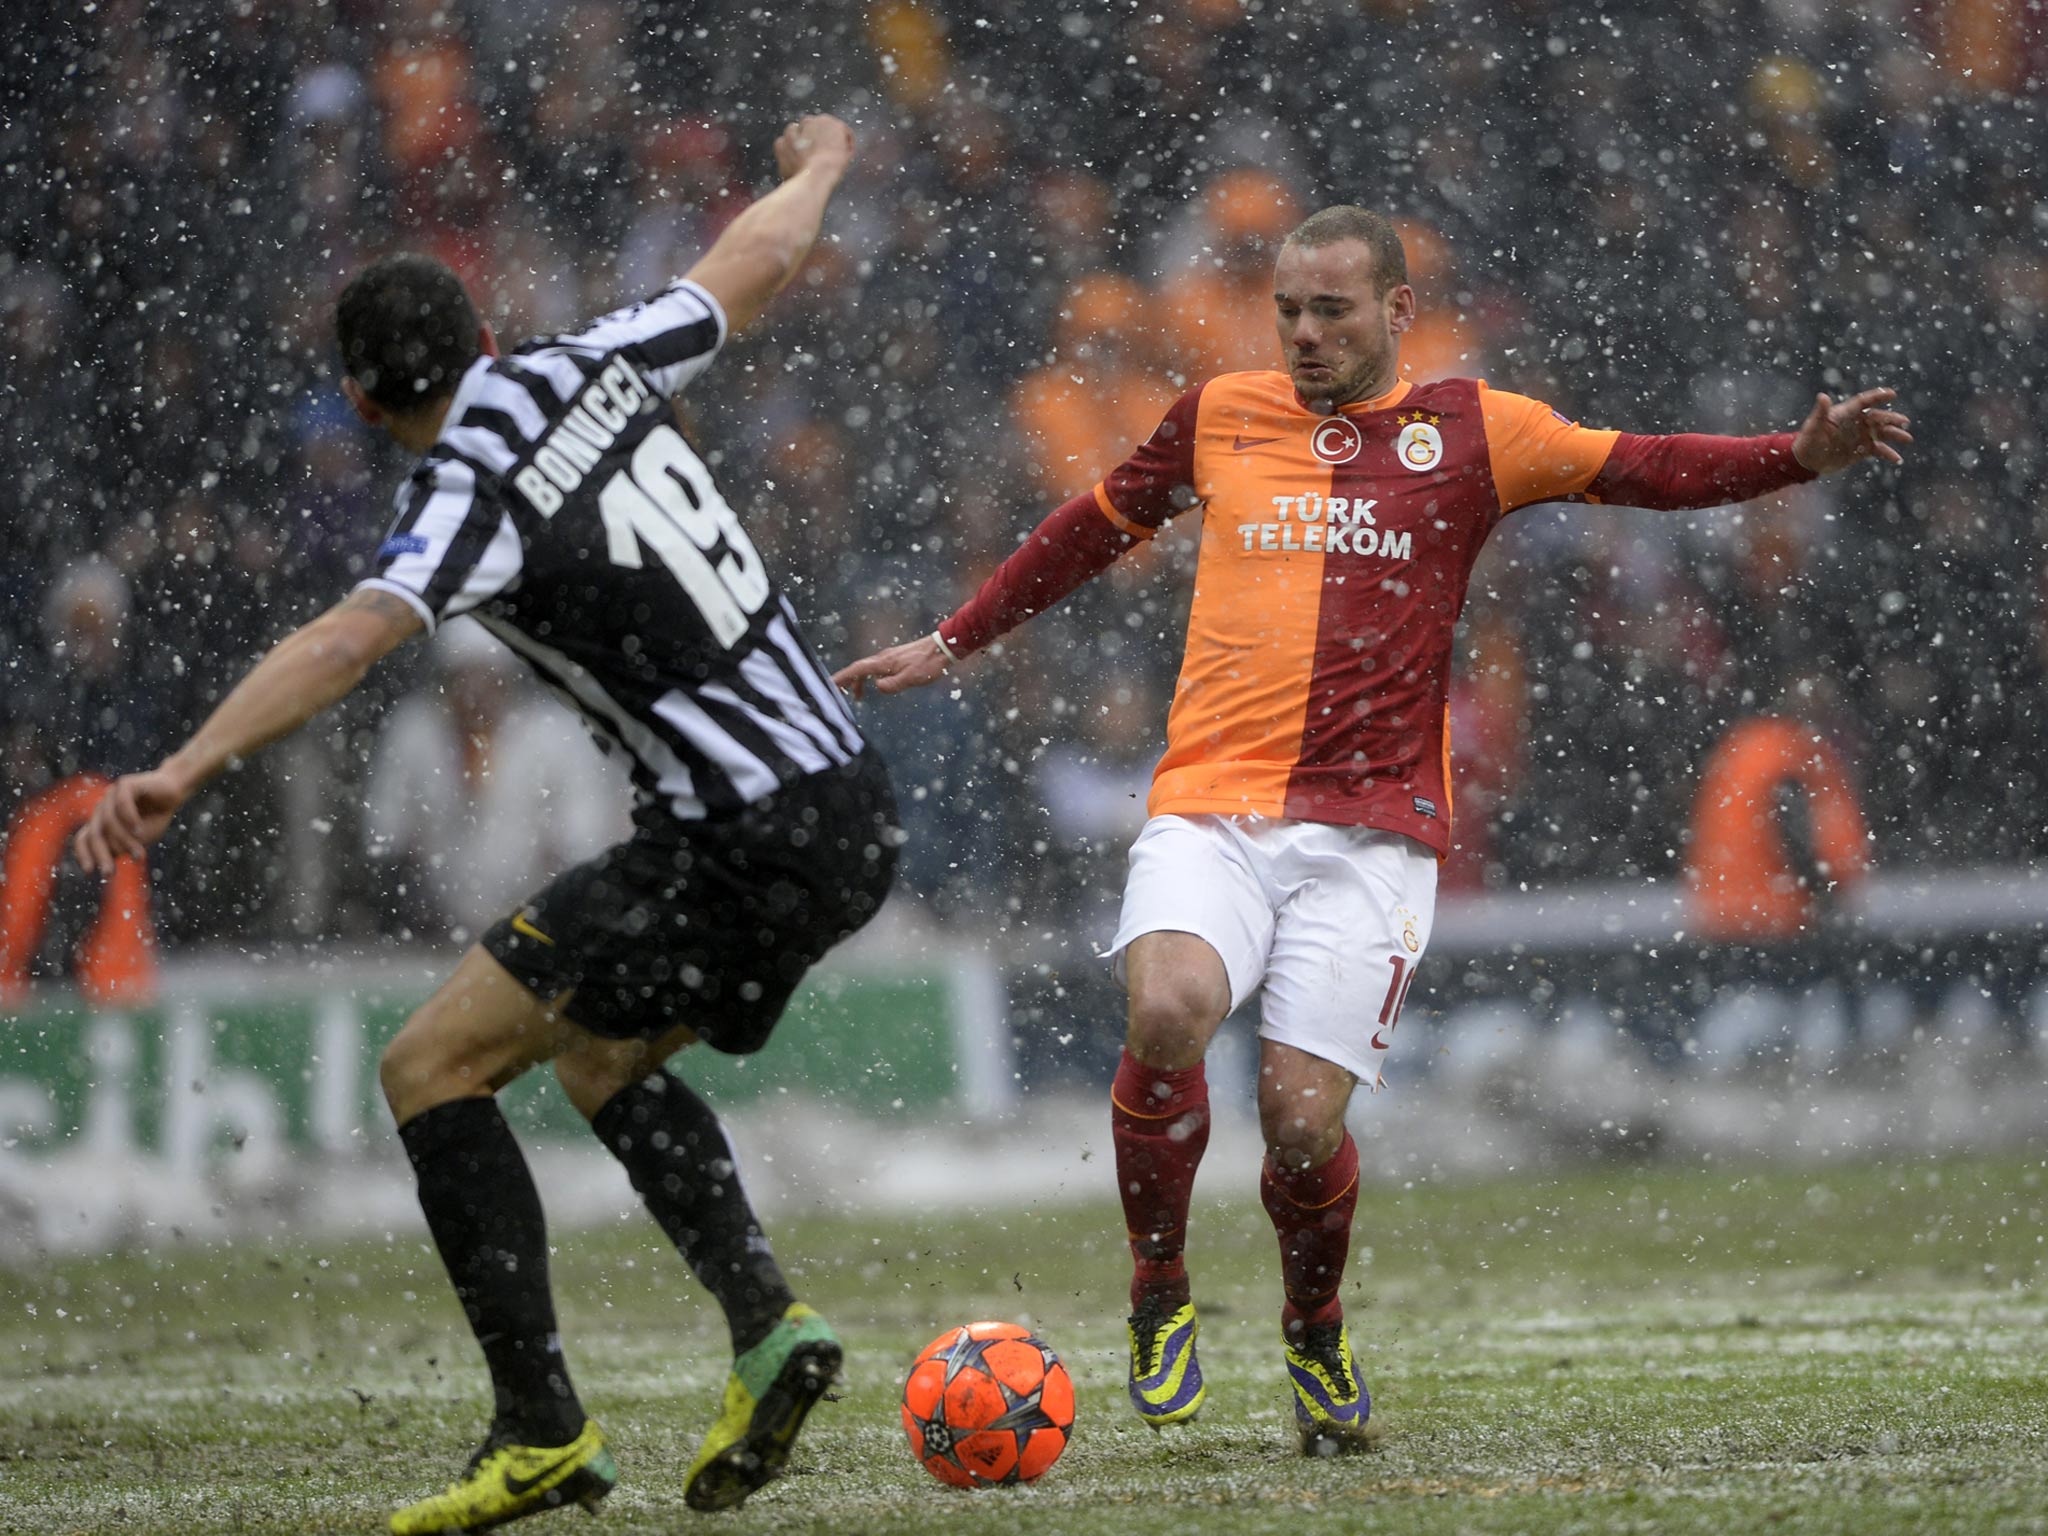 Galatasaray's Wesley Sneijder (R) fights for the ball with Juventus' Leonardo Banucci